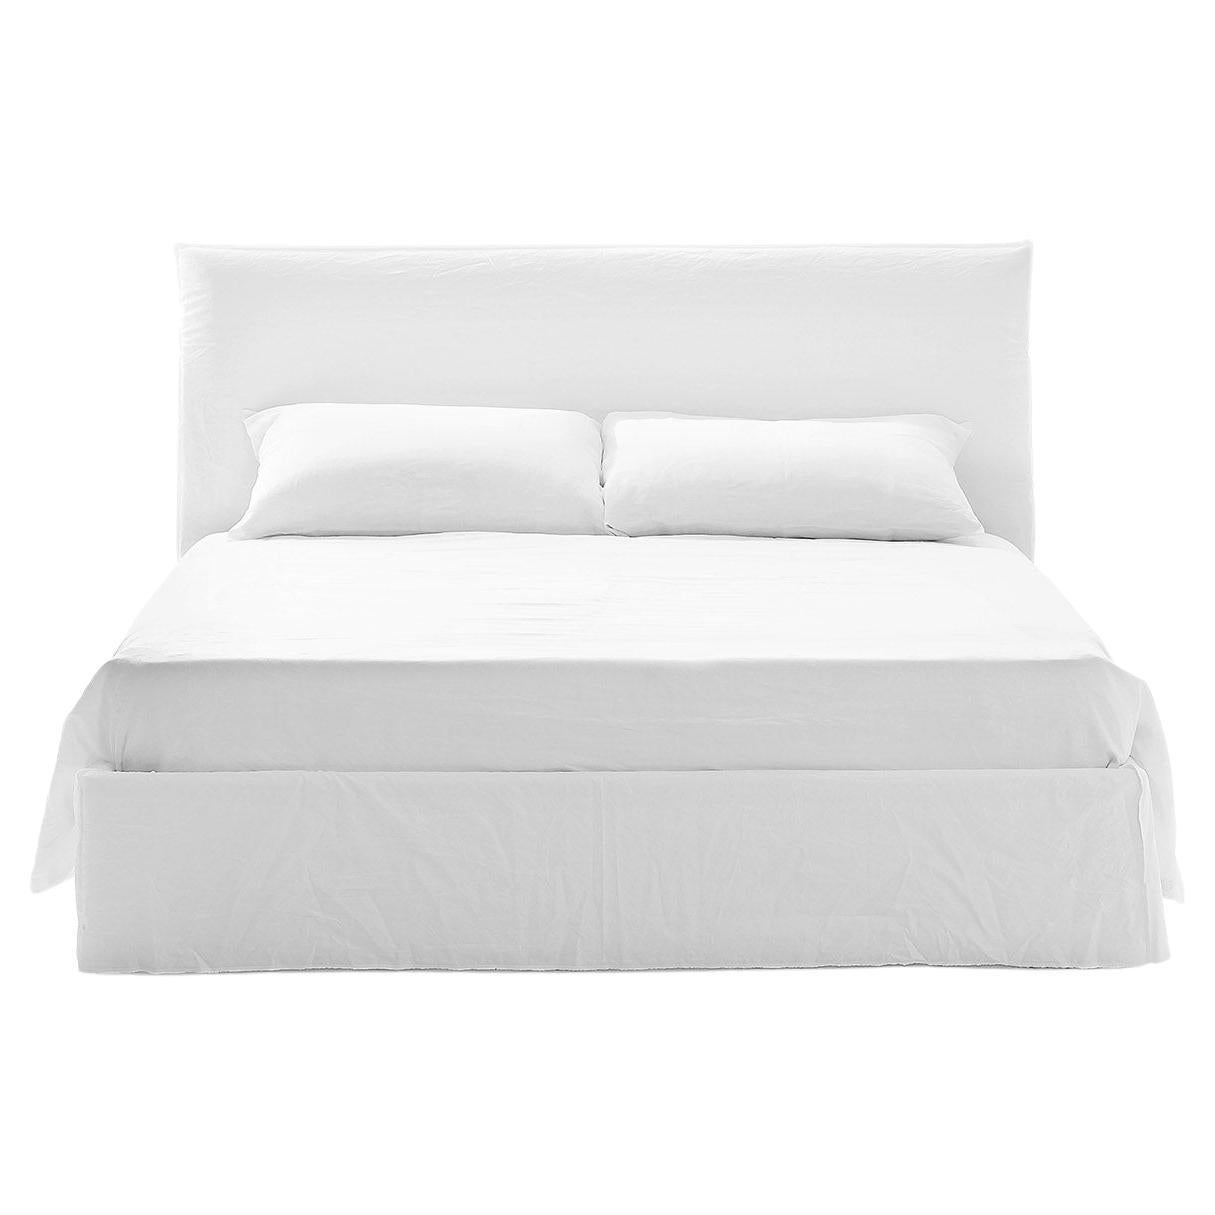 Gervasoni Ghost 80 E Knock Down Bed in White Linen Upholstery by Paola Navone For Sale